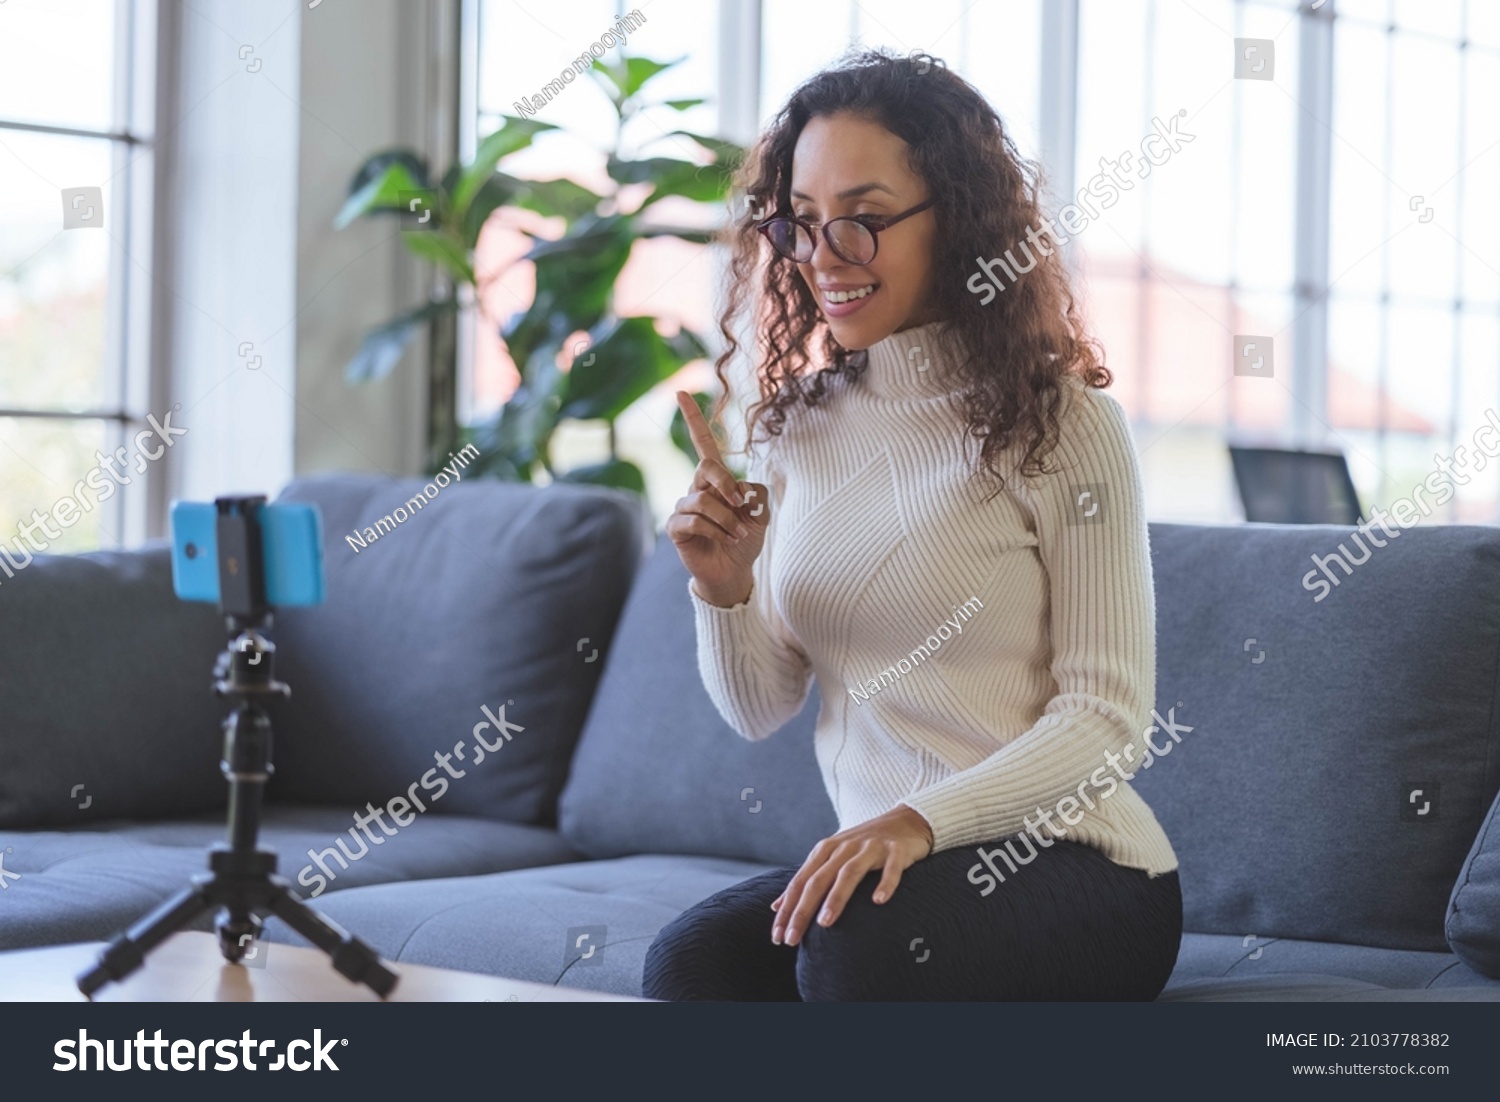 Young African American women wearing eyeglasses live streaming training on the sofa through the application from smartphone to social media during the coronavirus outbreak. #2103778382